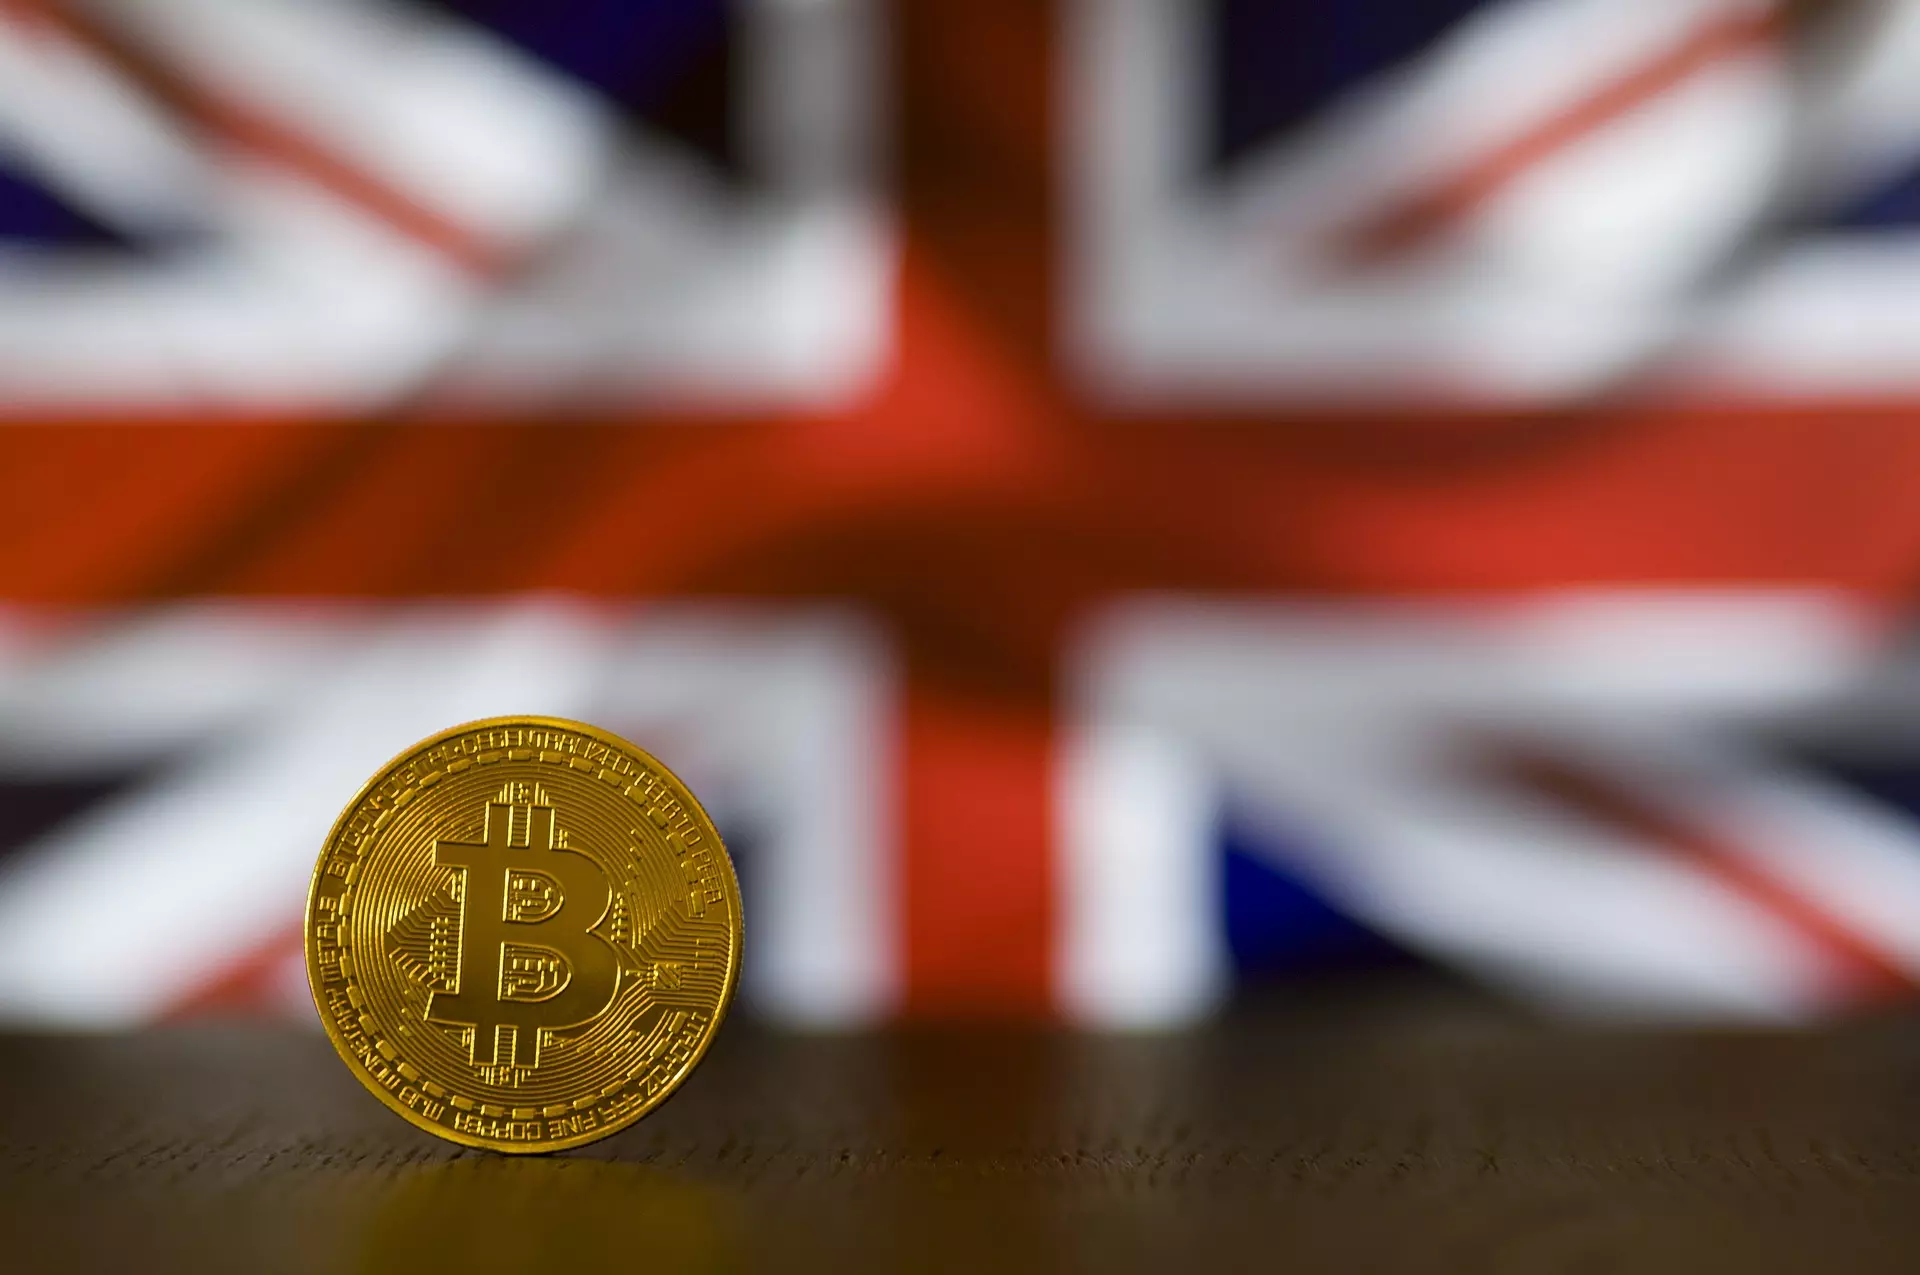 A cryptocurrency coin in front of a Union Jack